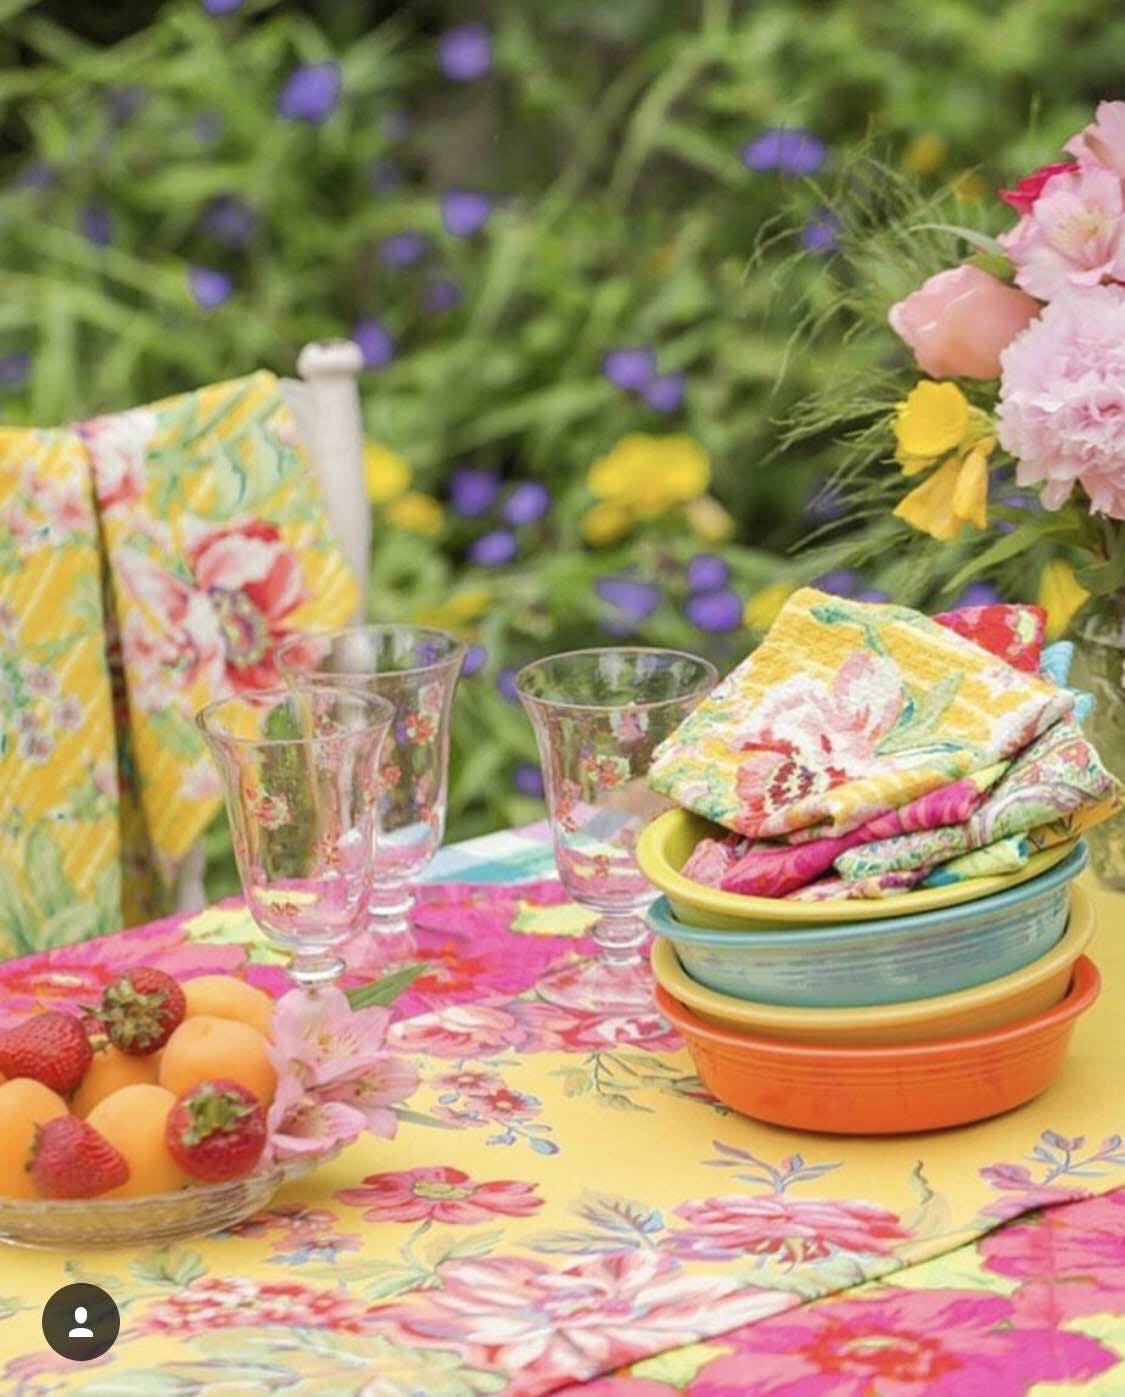 Check Out April Cornell For Beautiful Floral Home Furnishings & Clothes